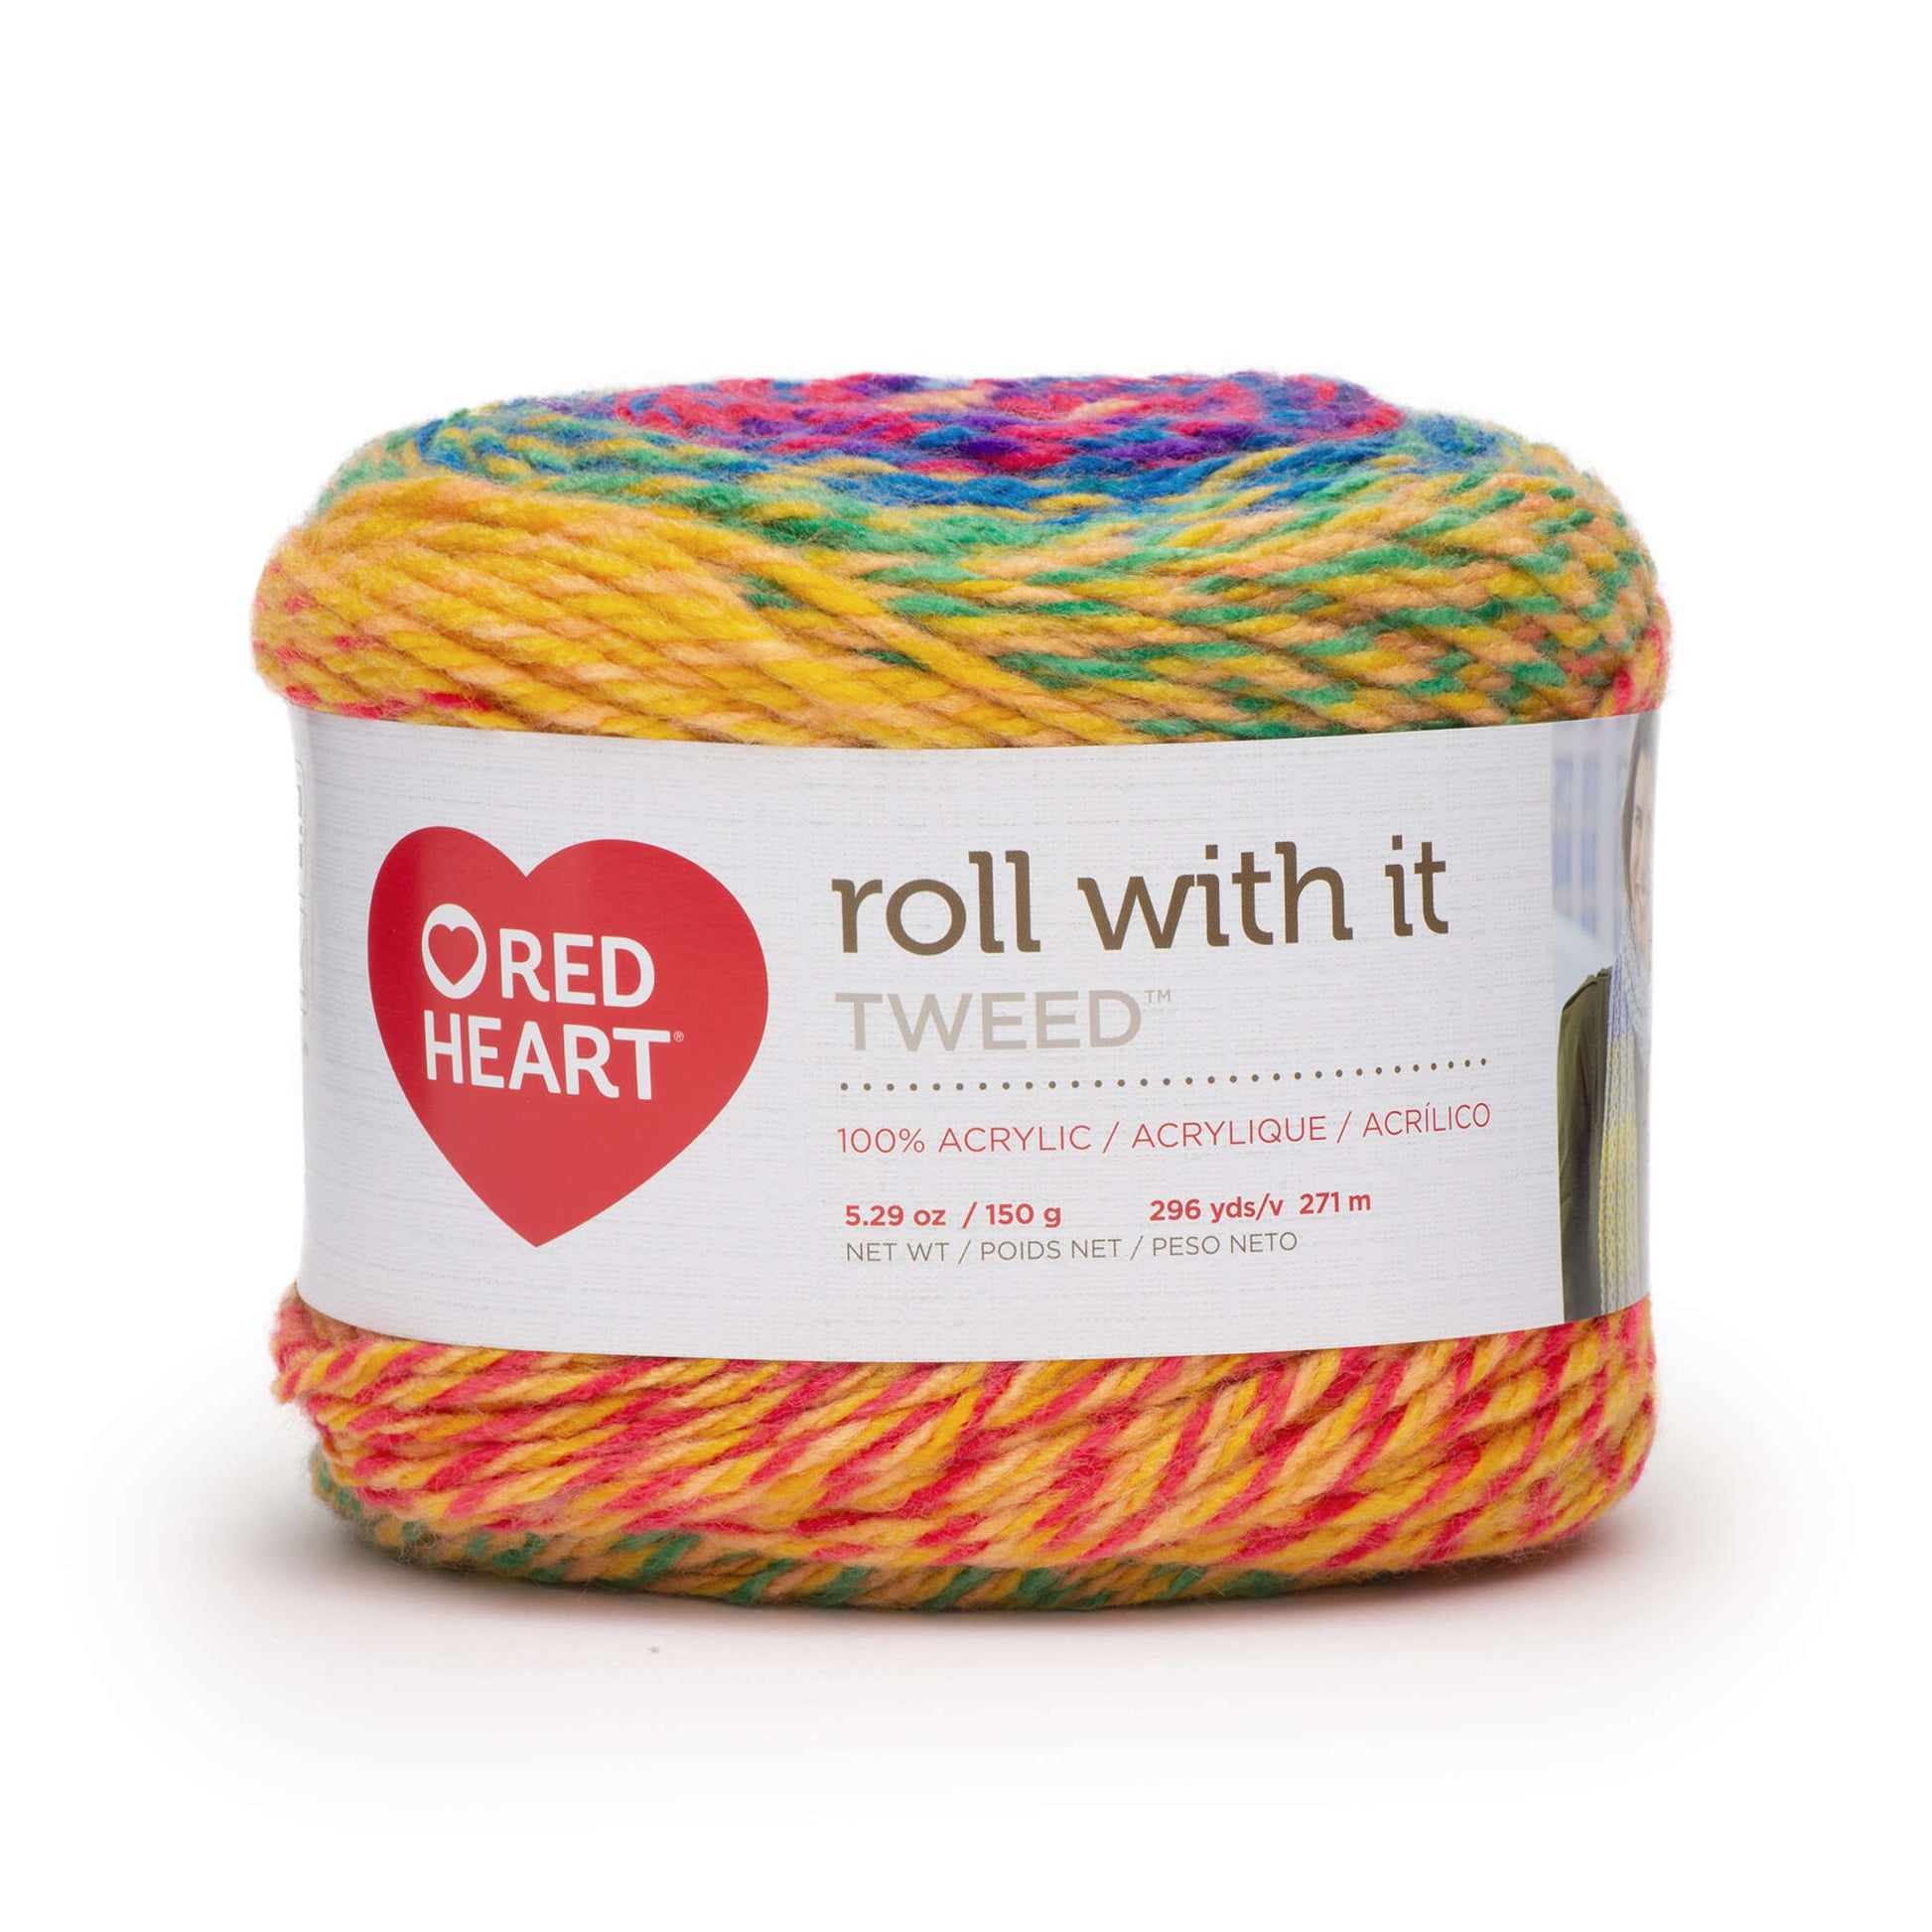 Red Heart Roll With It Tweed Yarn - Clearance shades Crayons